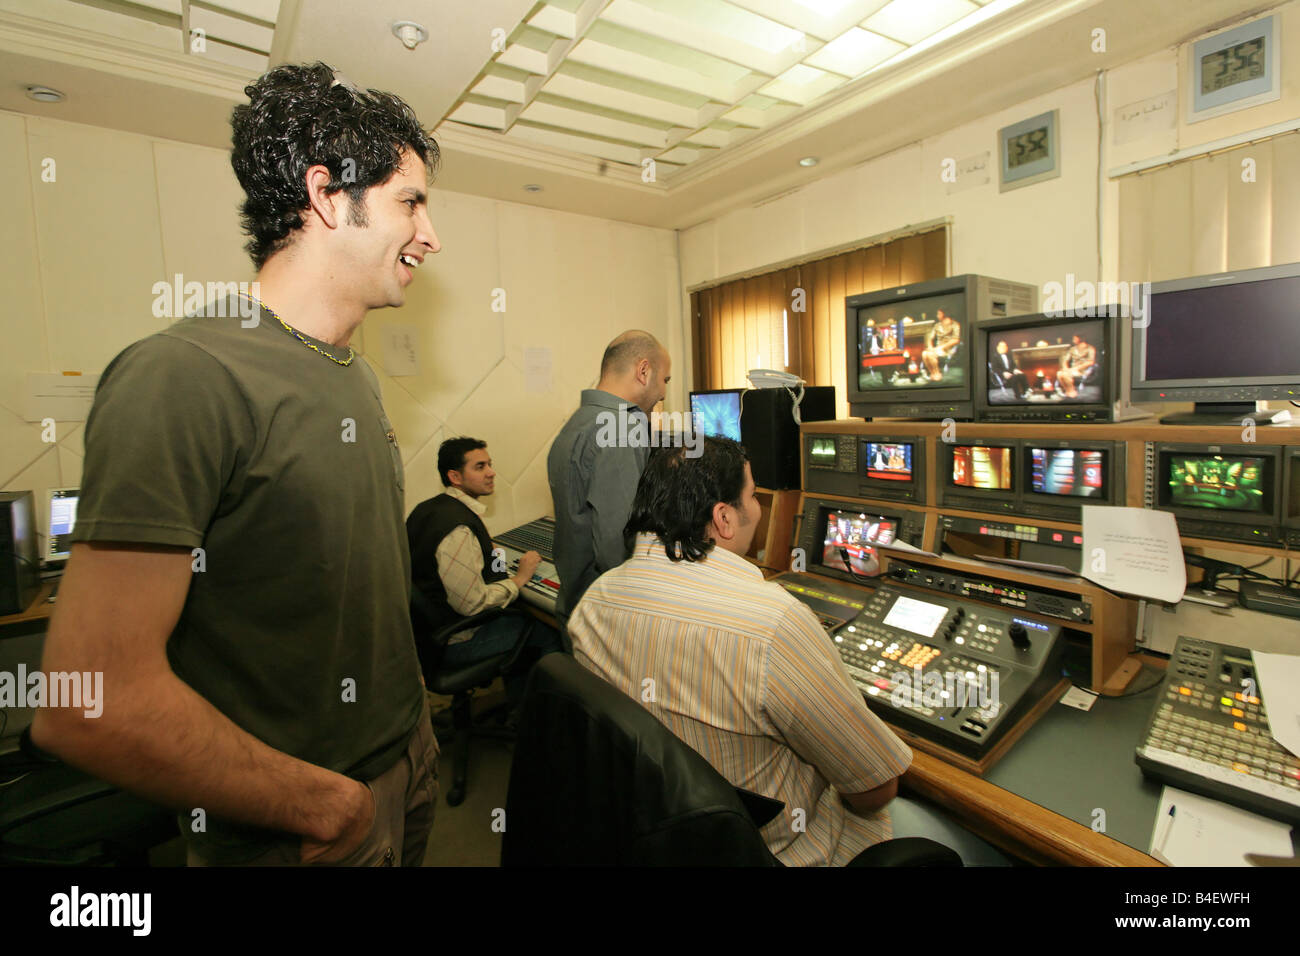 Workers at independent Iraqi television station, Cairo, Egypt Stock Photo